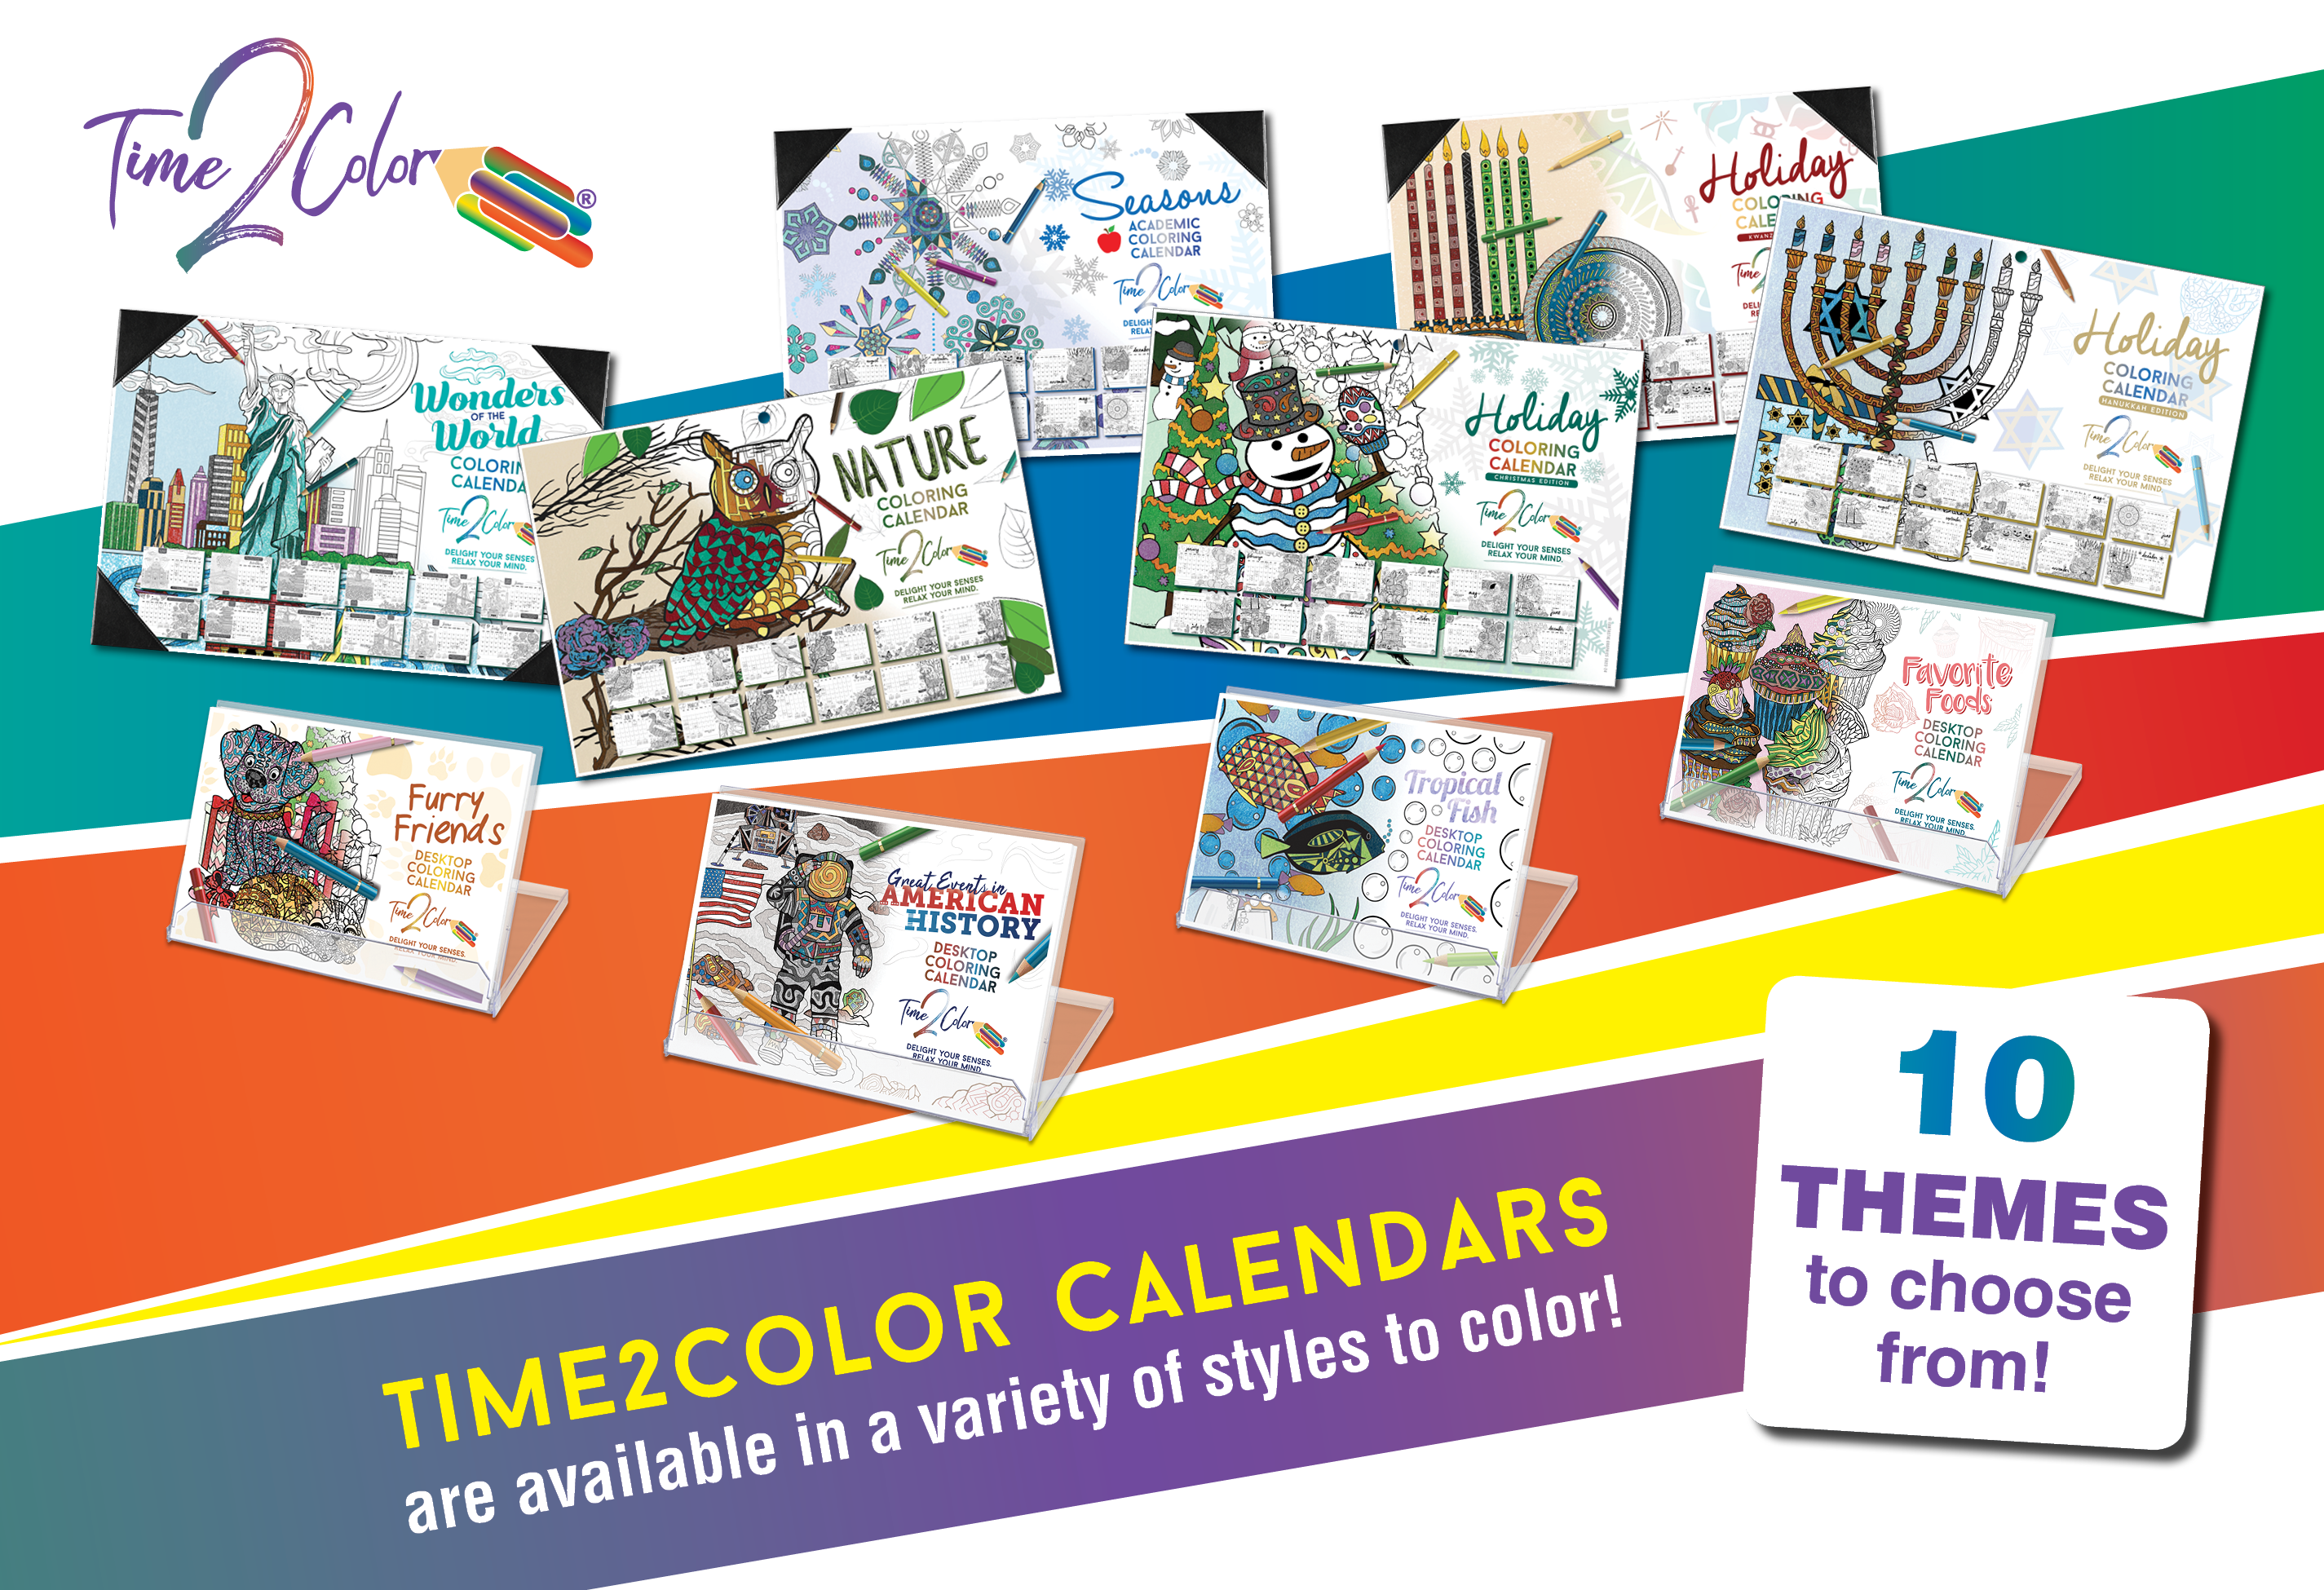 2024 Great Events in American History Theme Wall Coloring Calendar